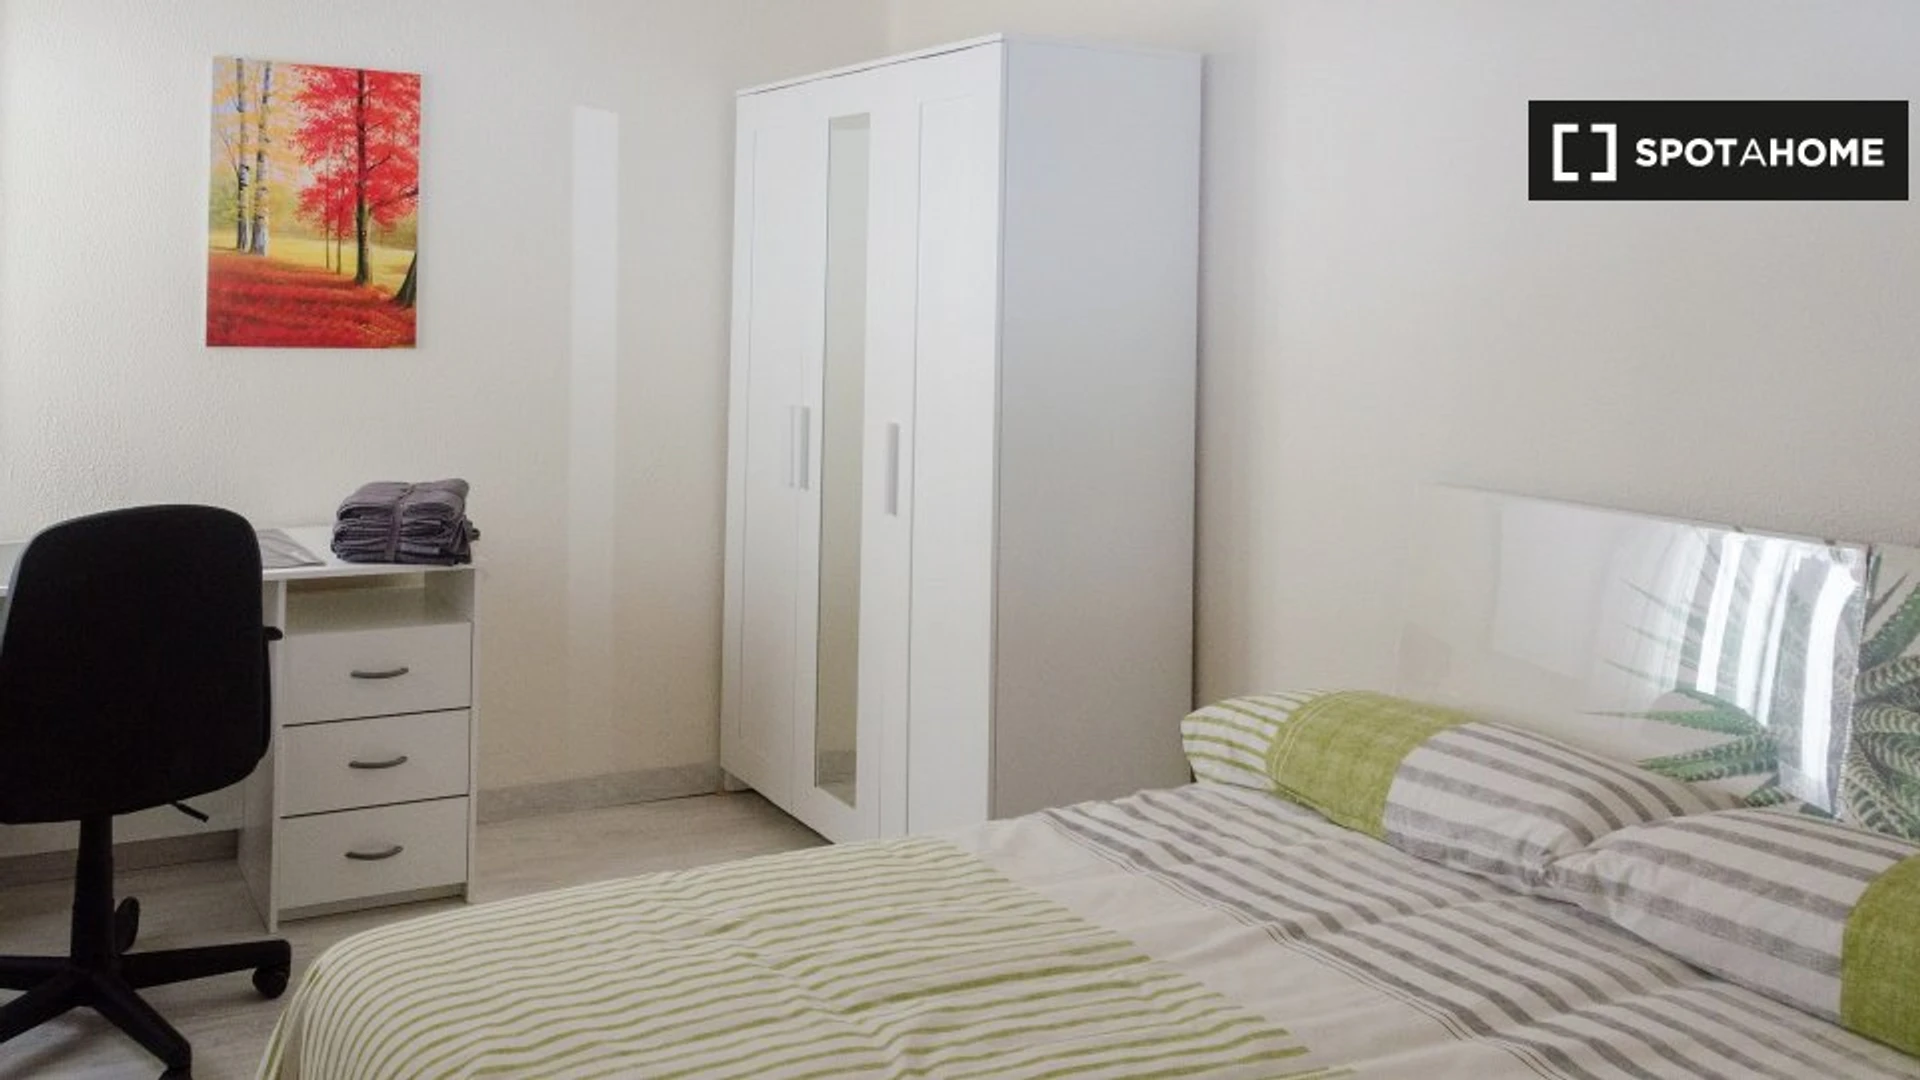 Room for rent with double bed Oviedo